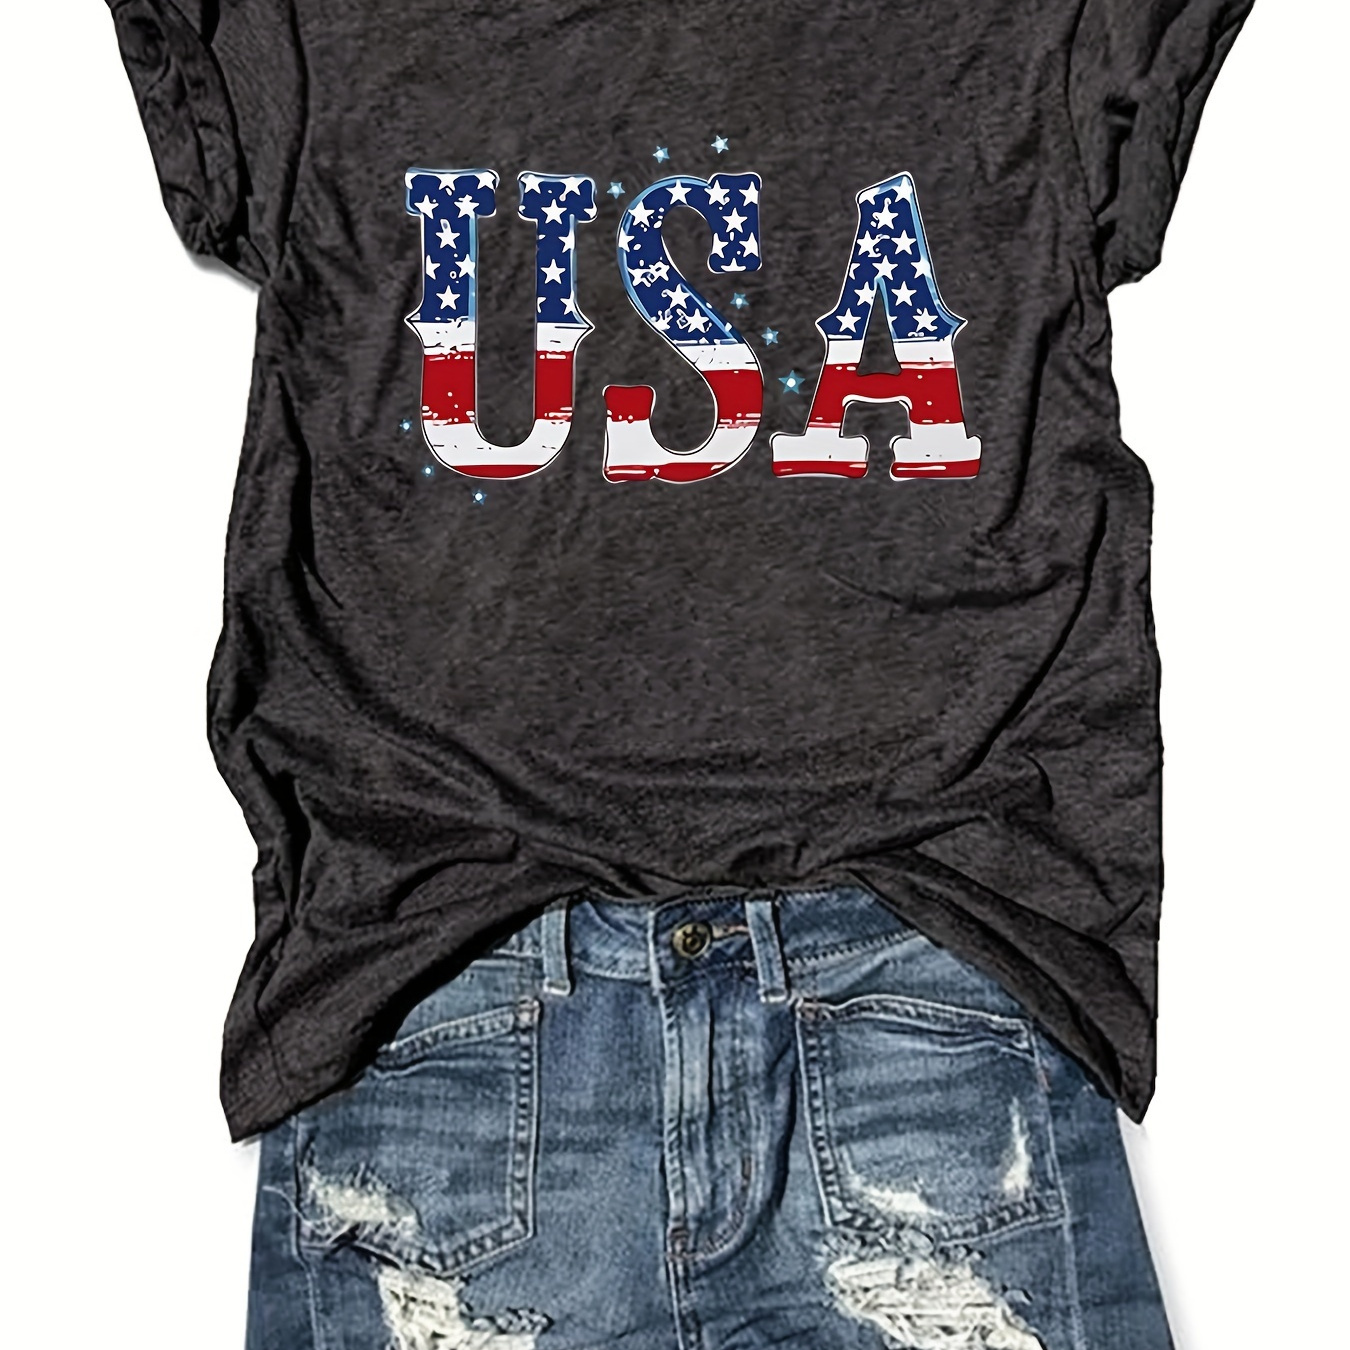 

Usa Print T-shirt, Short Sleeve Crew Neck Casual Top For Summer & Spring, Women's Clothing